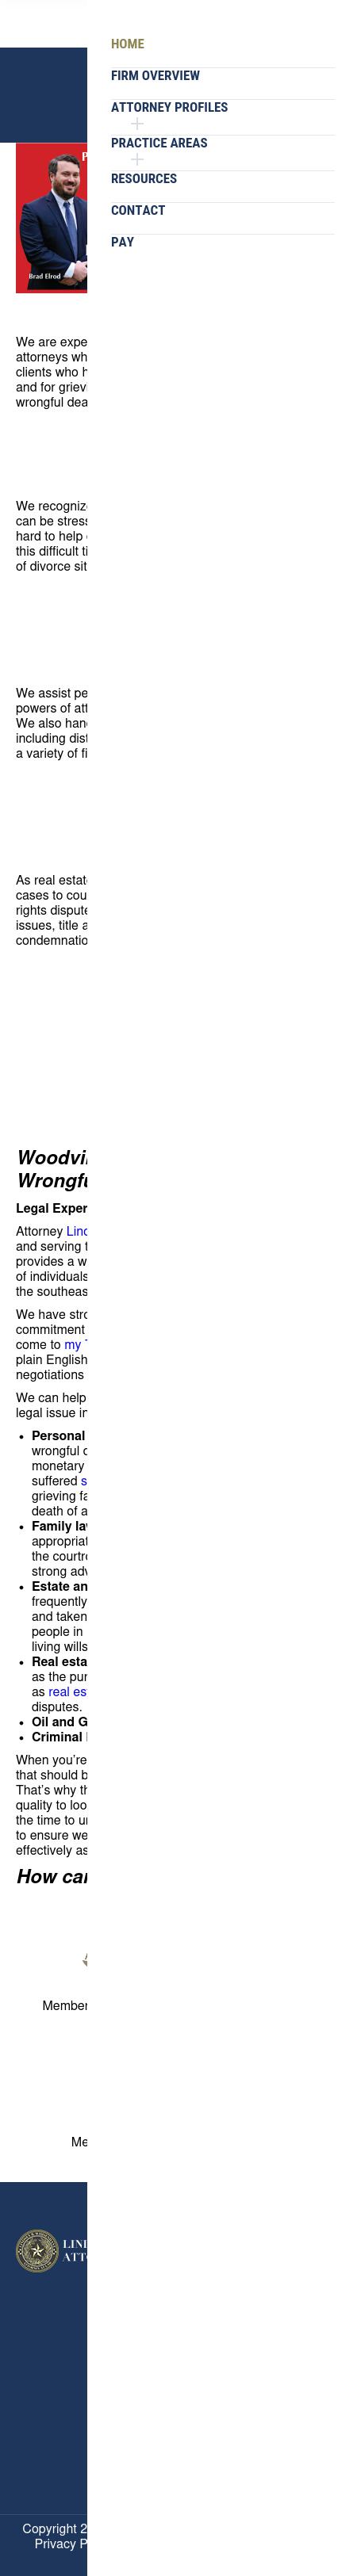 Lindsey B. Whisenhant, Attorney At Law - Woodville TX Lawyers